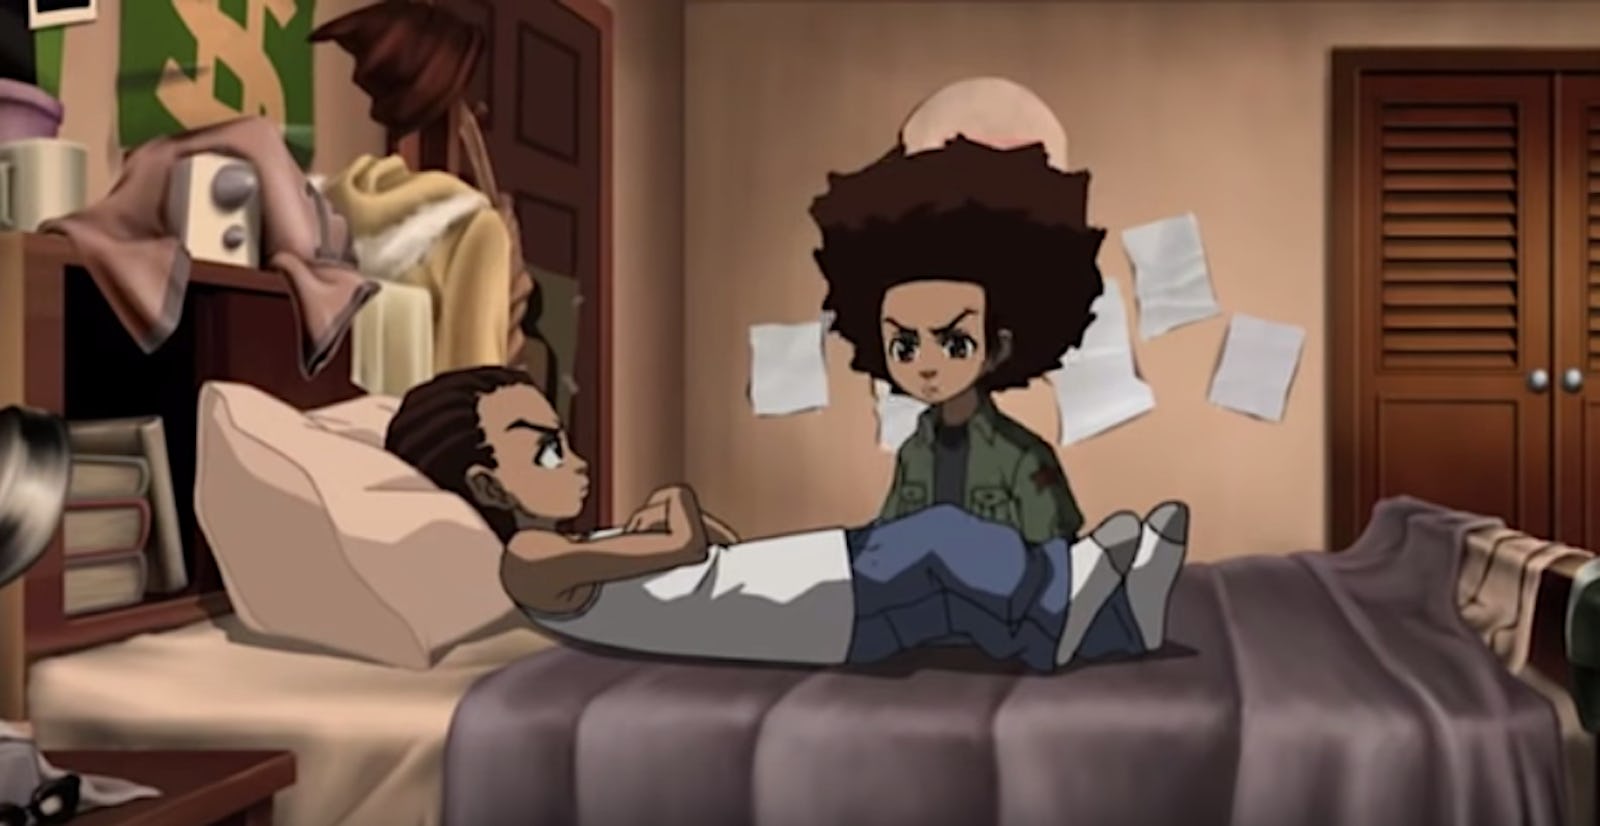 A Boondocks Reboot Is Coming To Hbo Max With A Brand New Look